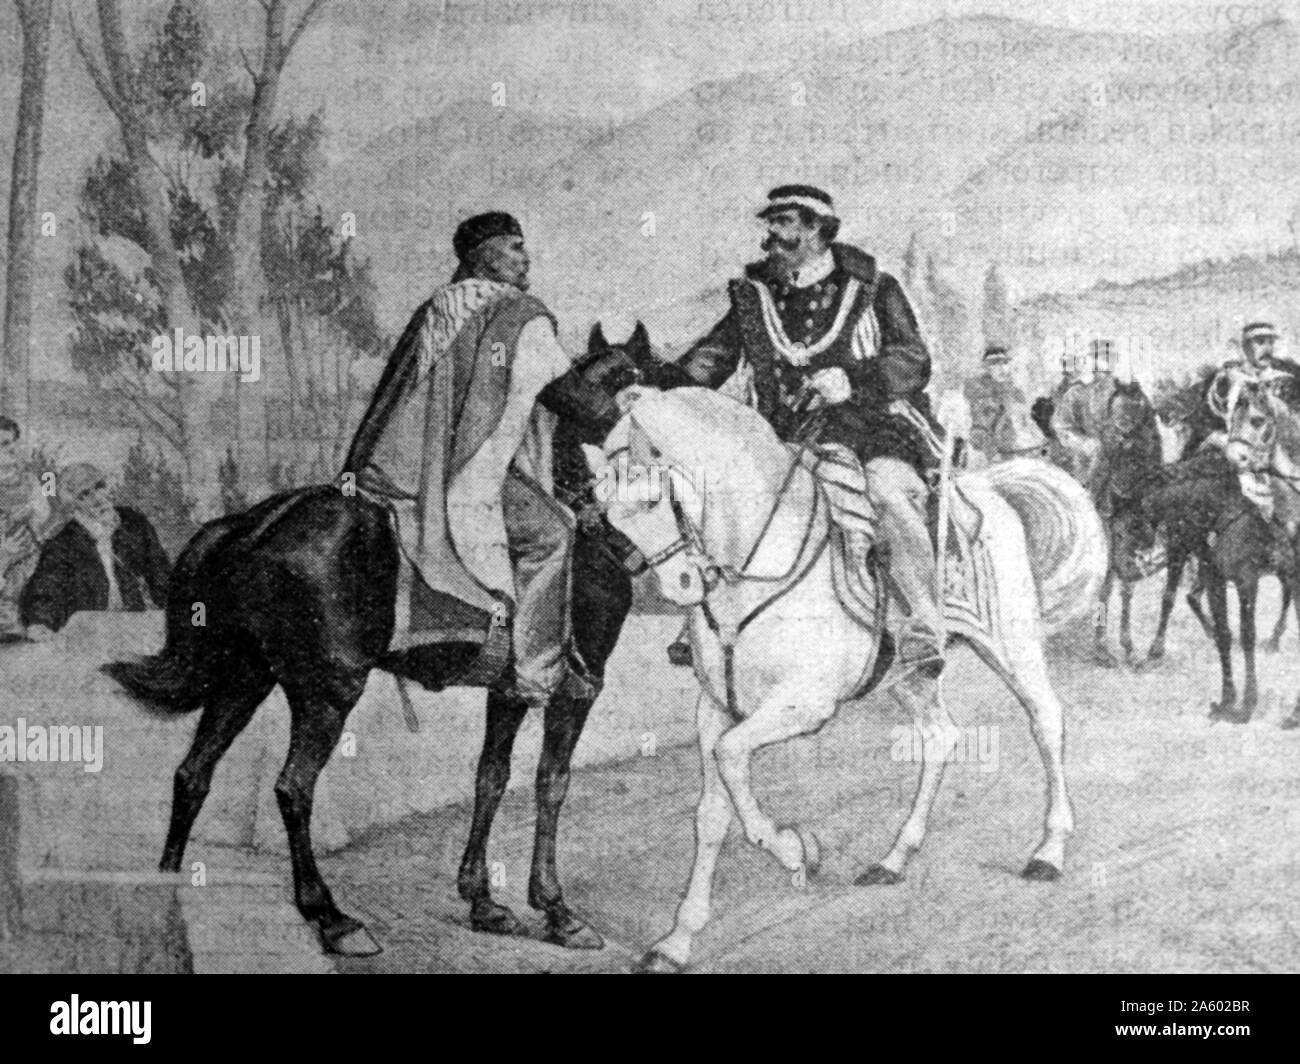 Illustration of Giuseppe Garibaldi (1807-1882) an Italian general and politician who played a large role in the history of Italy, with Victor Emmanuel II of Italy (1820-1878) King of Sardinia. Dated 19th Century. Stock Photo